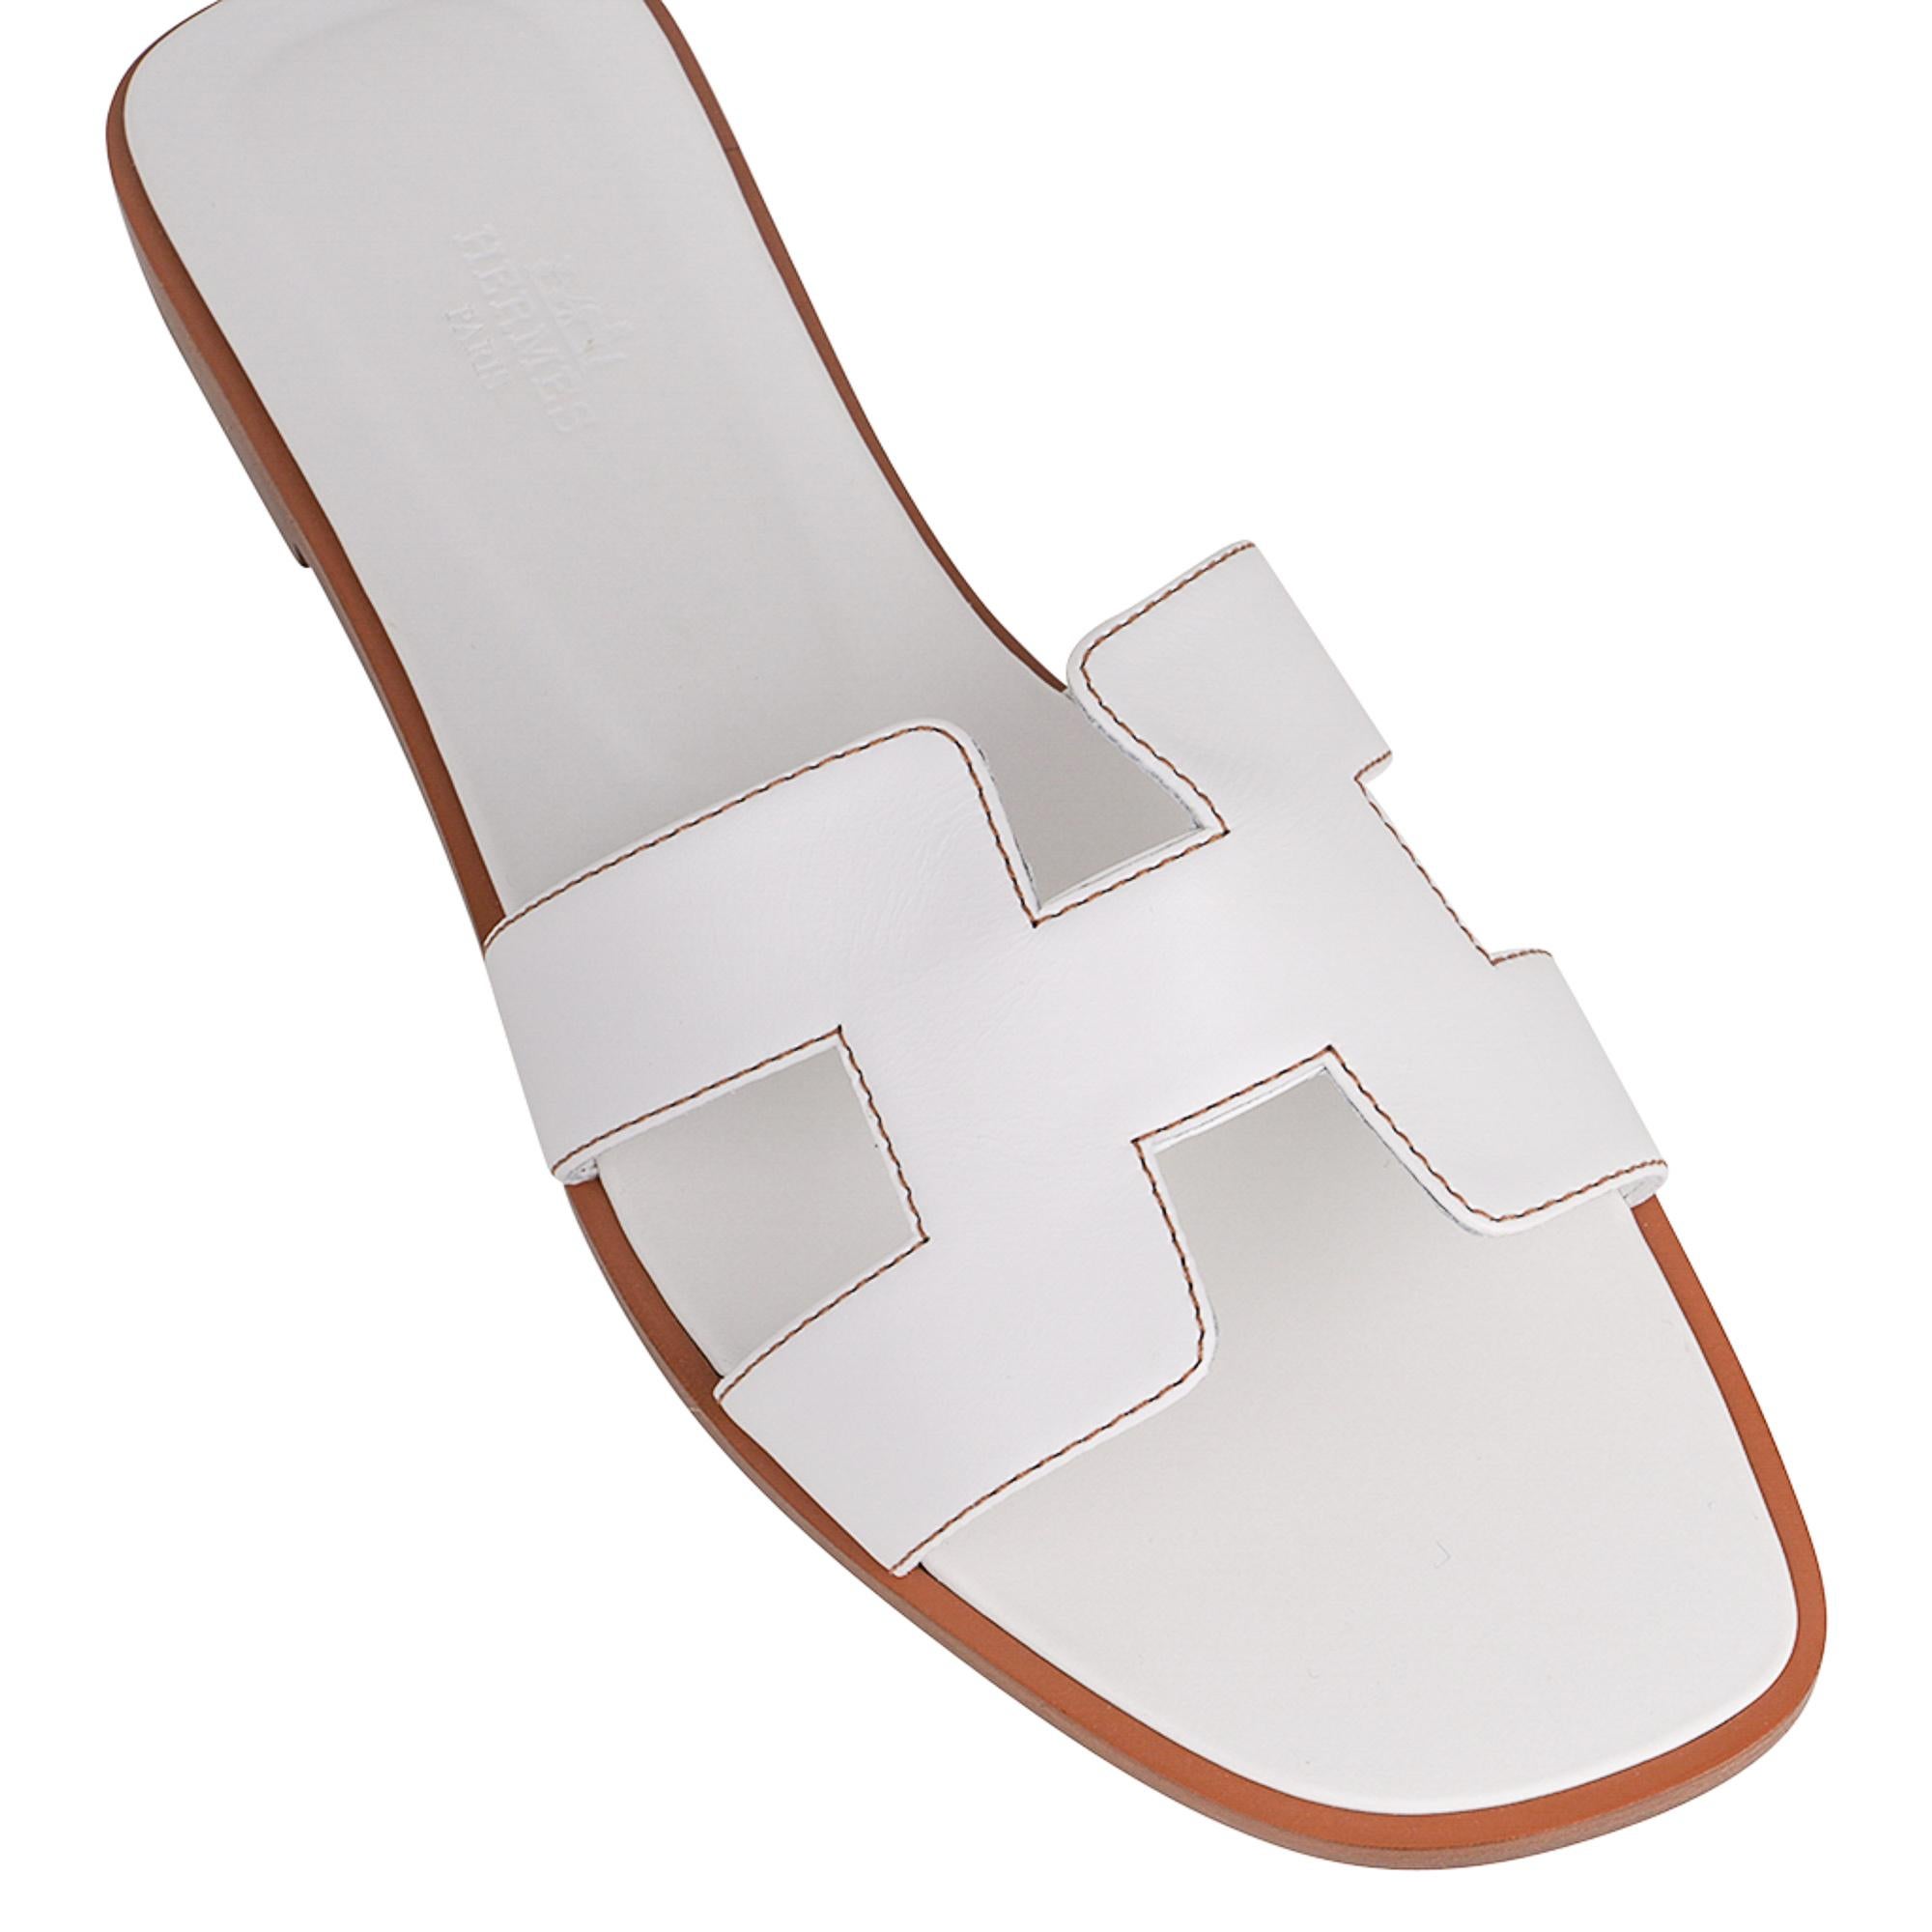 Mightychic offers Hermes Oran exquisite White Box calfskin leather slides.
The iconic Havane top stitched H cutout over the top of the foot in sublime calfskin.
White embossed calfskin insole.
Wood heel with leather sole.
Natural wood heel with